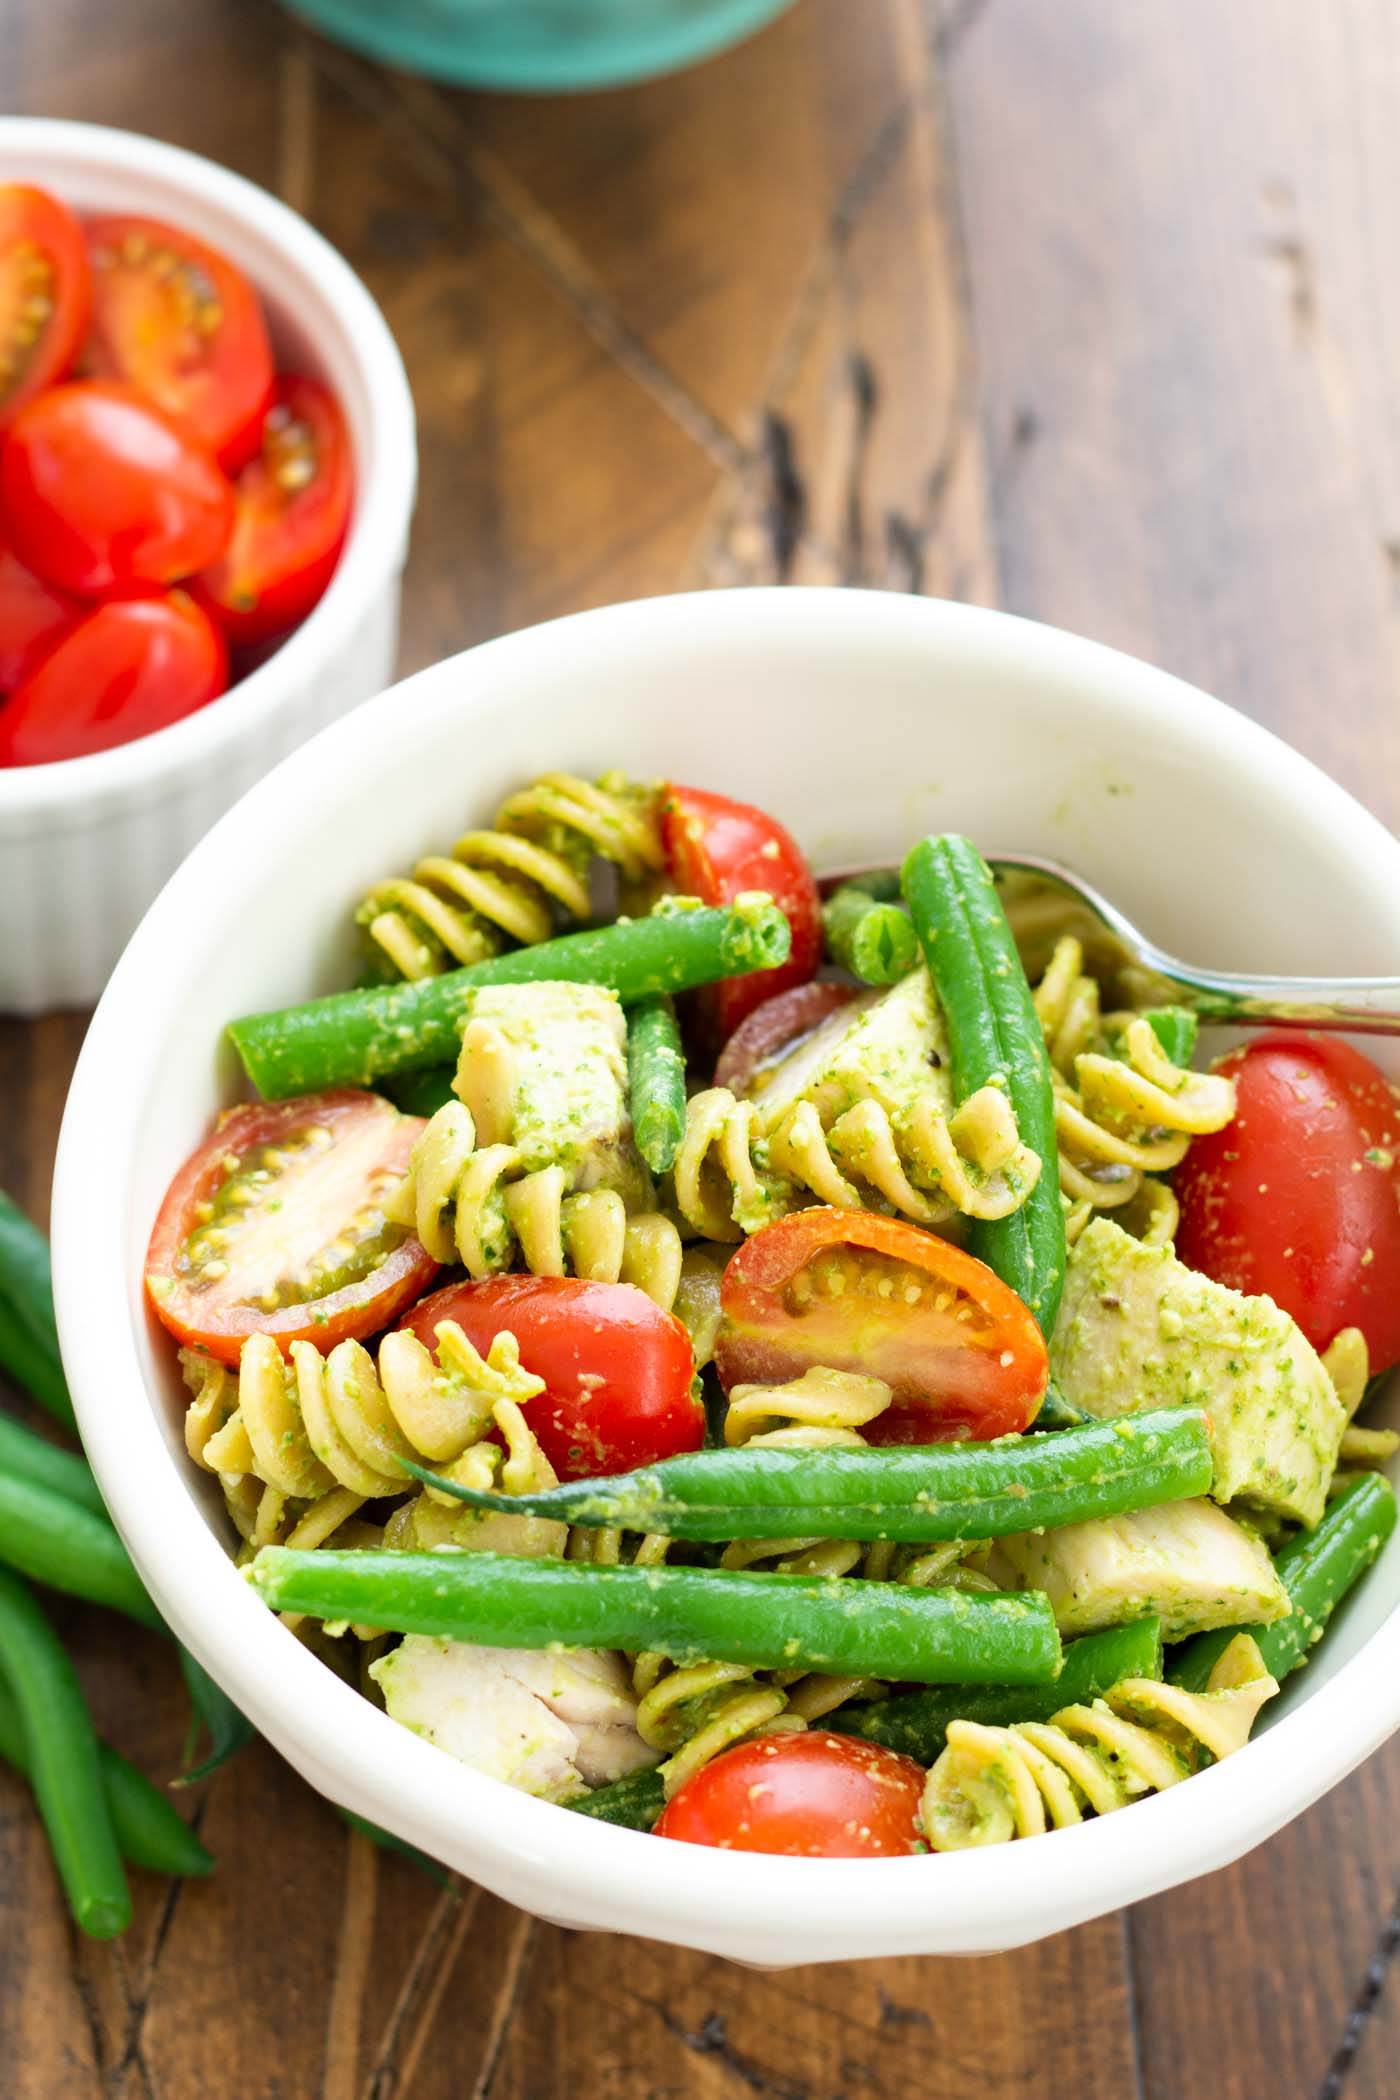 Chicken pesto pasta with green beans and tomatoes in a small bowl.